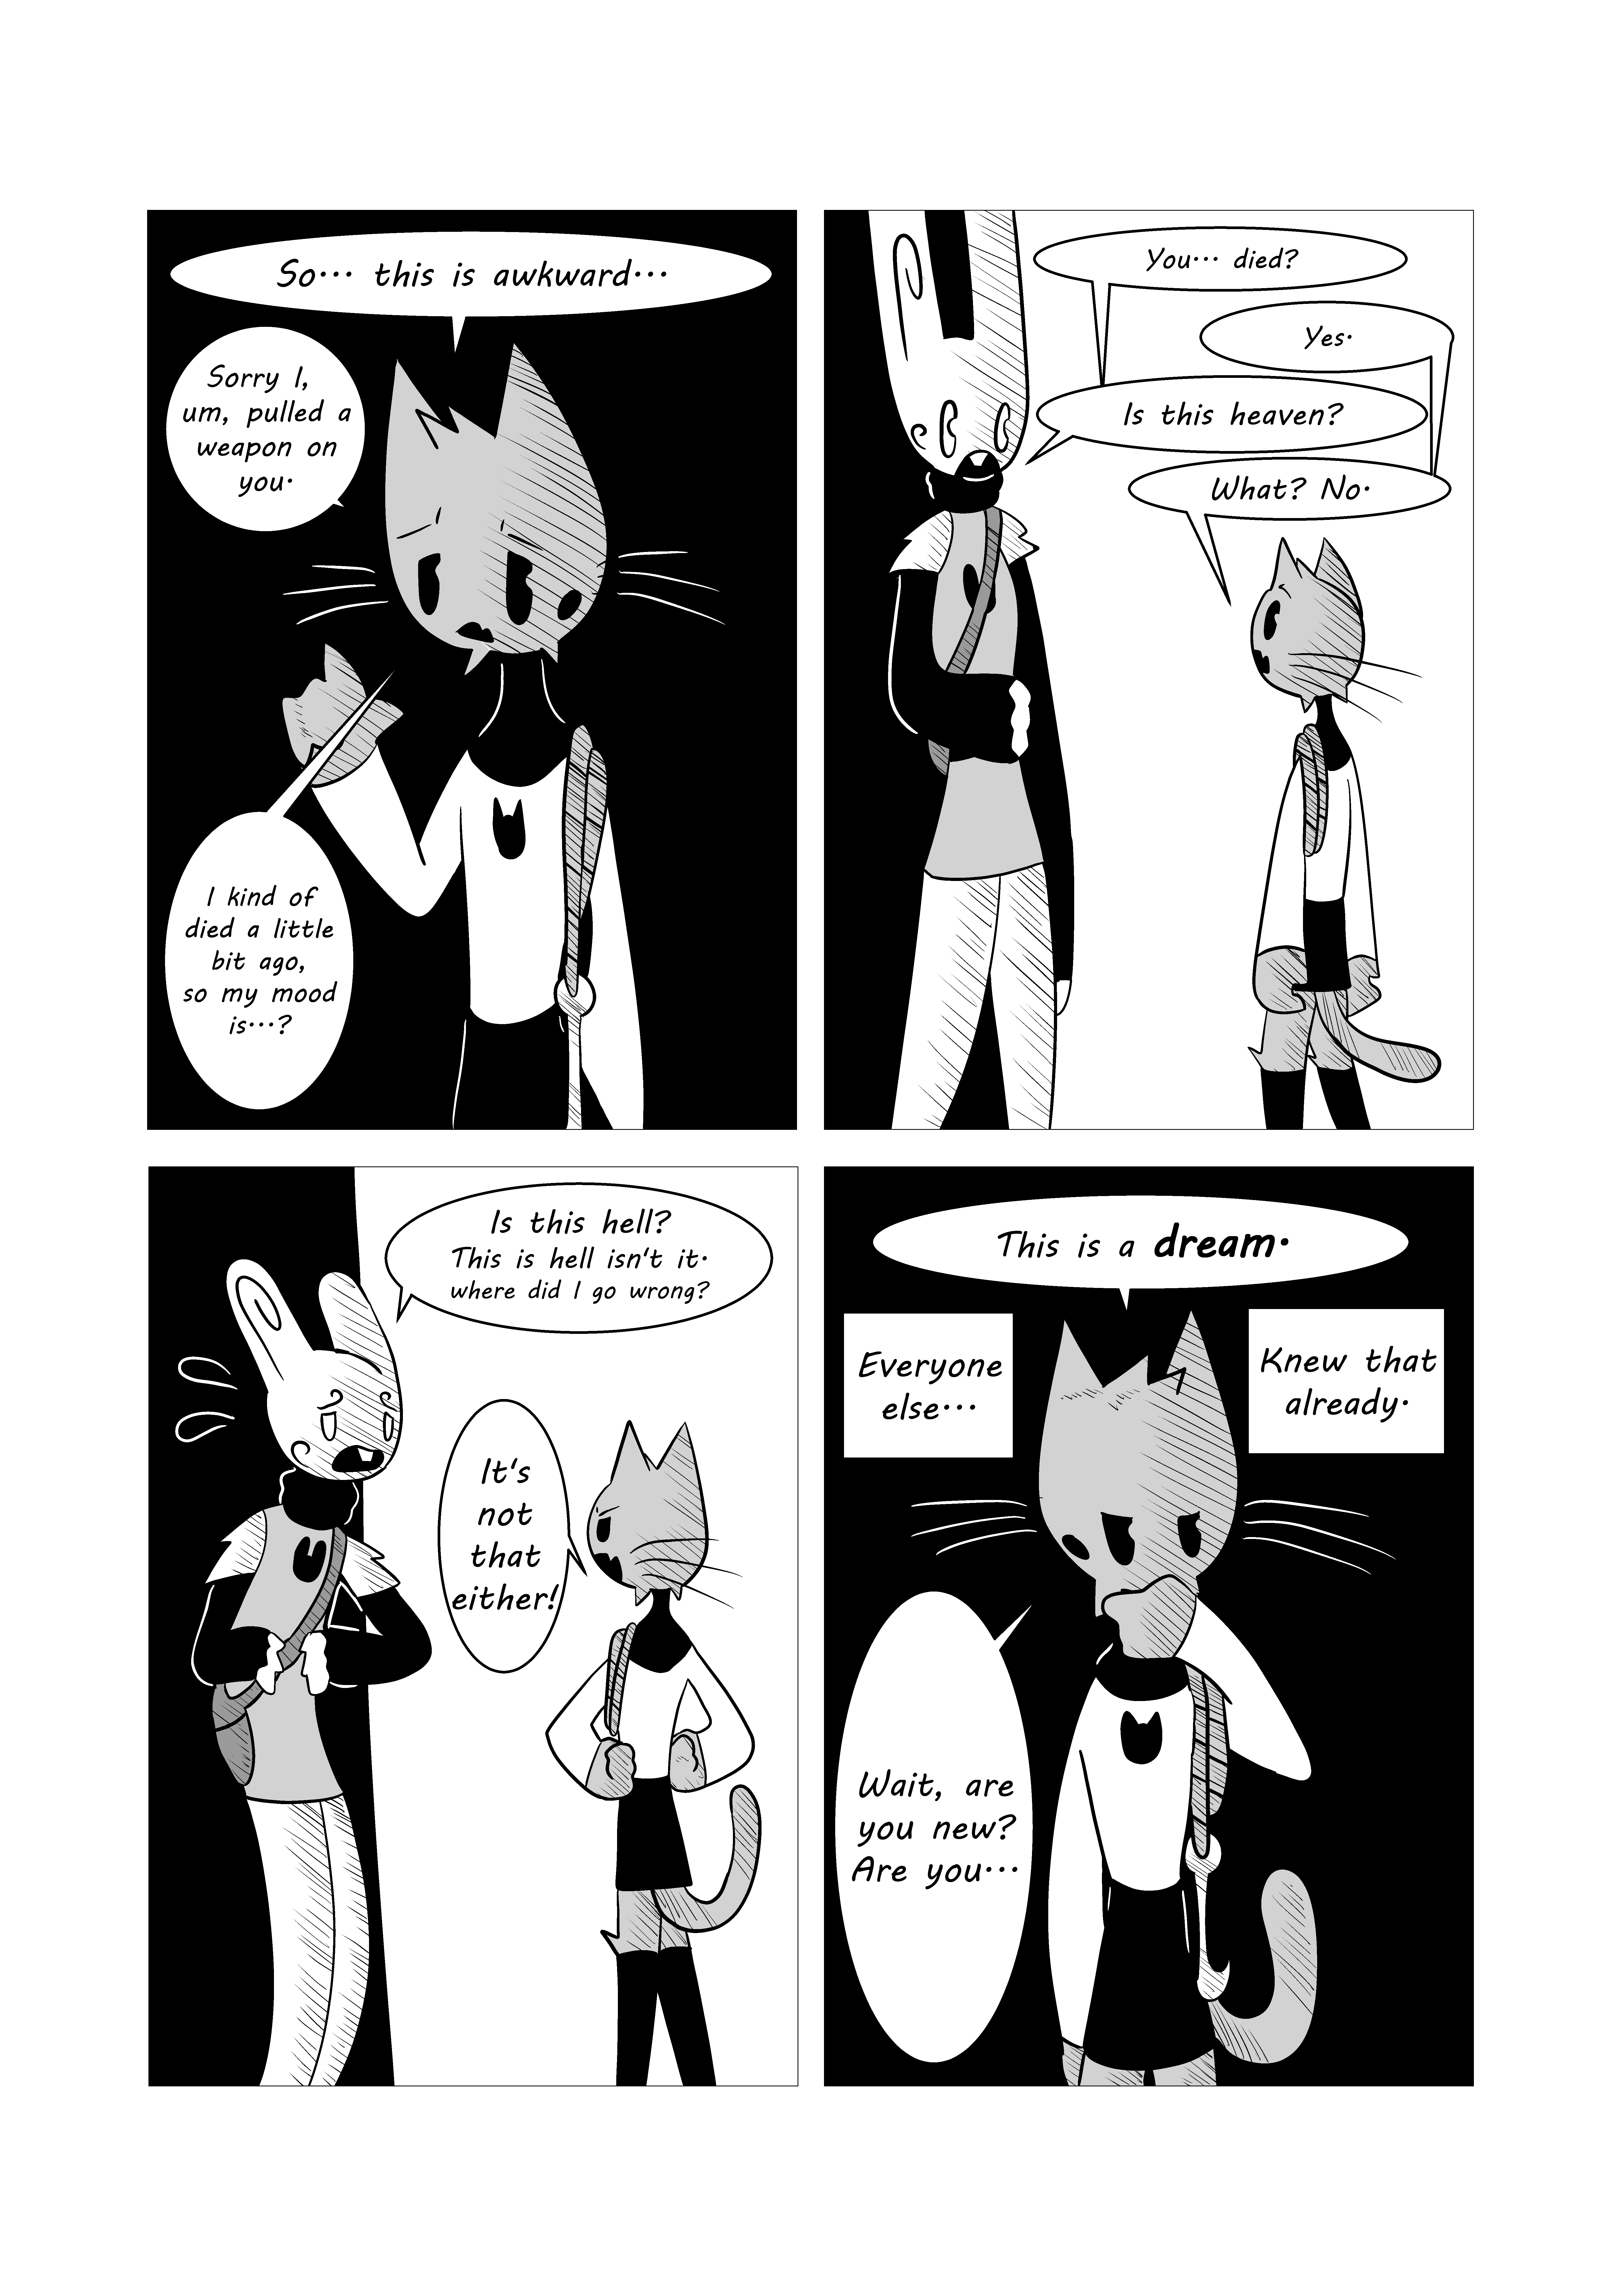 Page 57: Where did I go wrong?